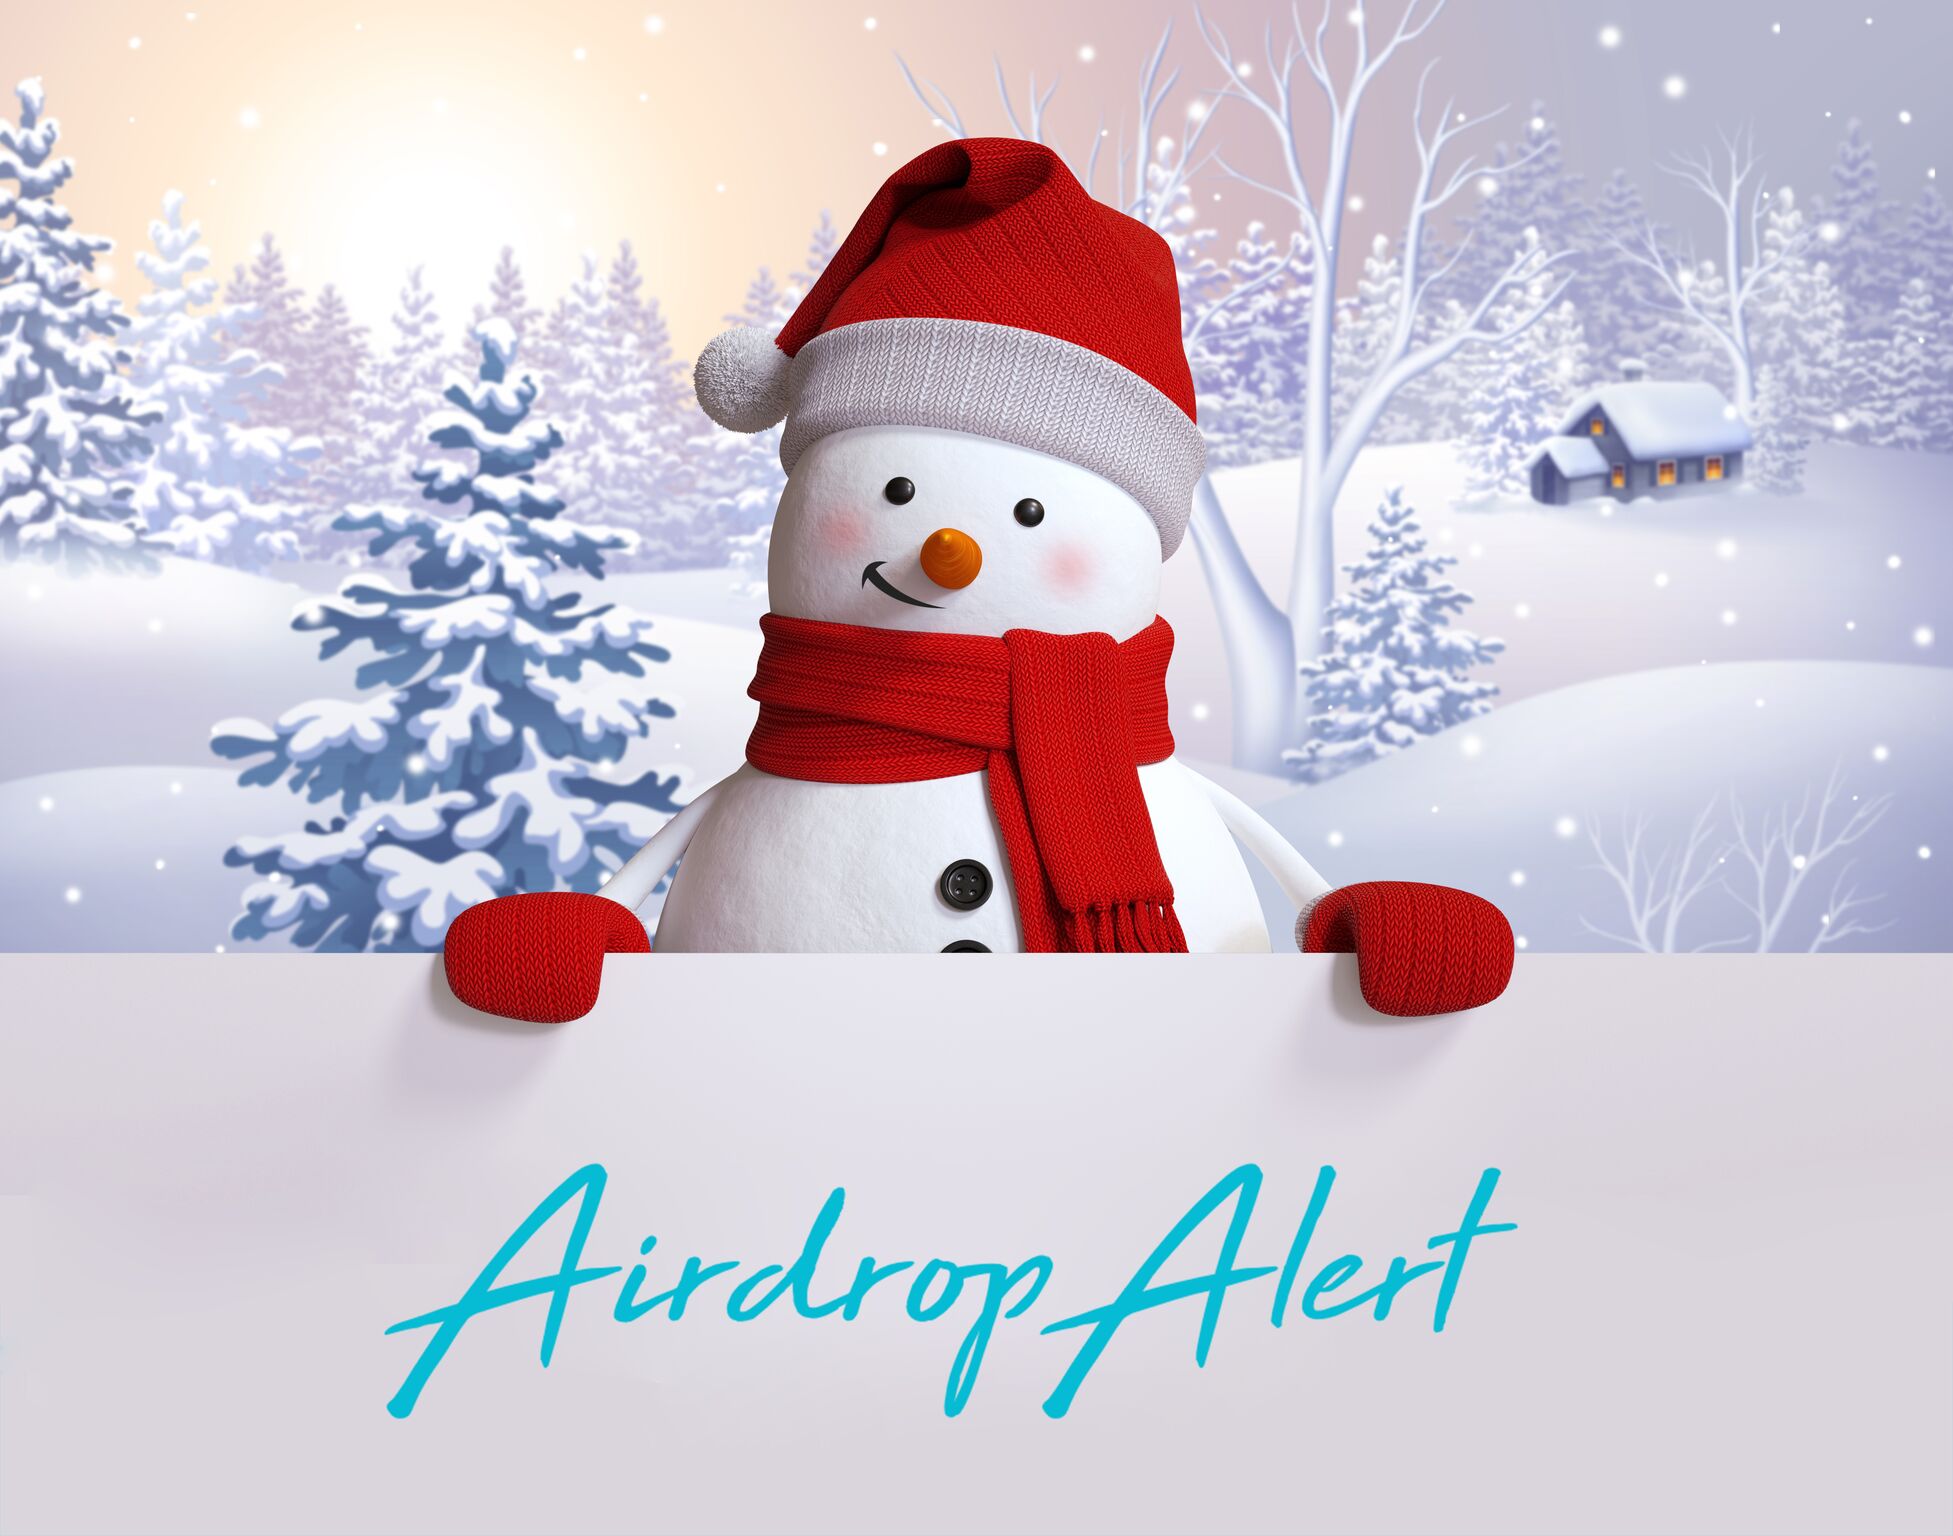 Is airdrop winter coming to an end?